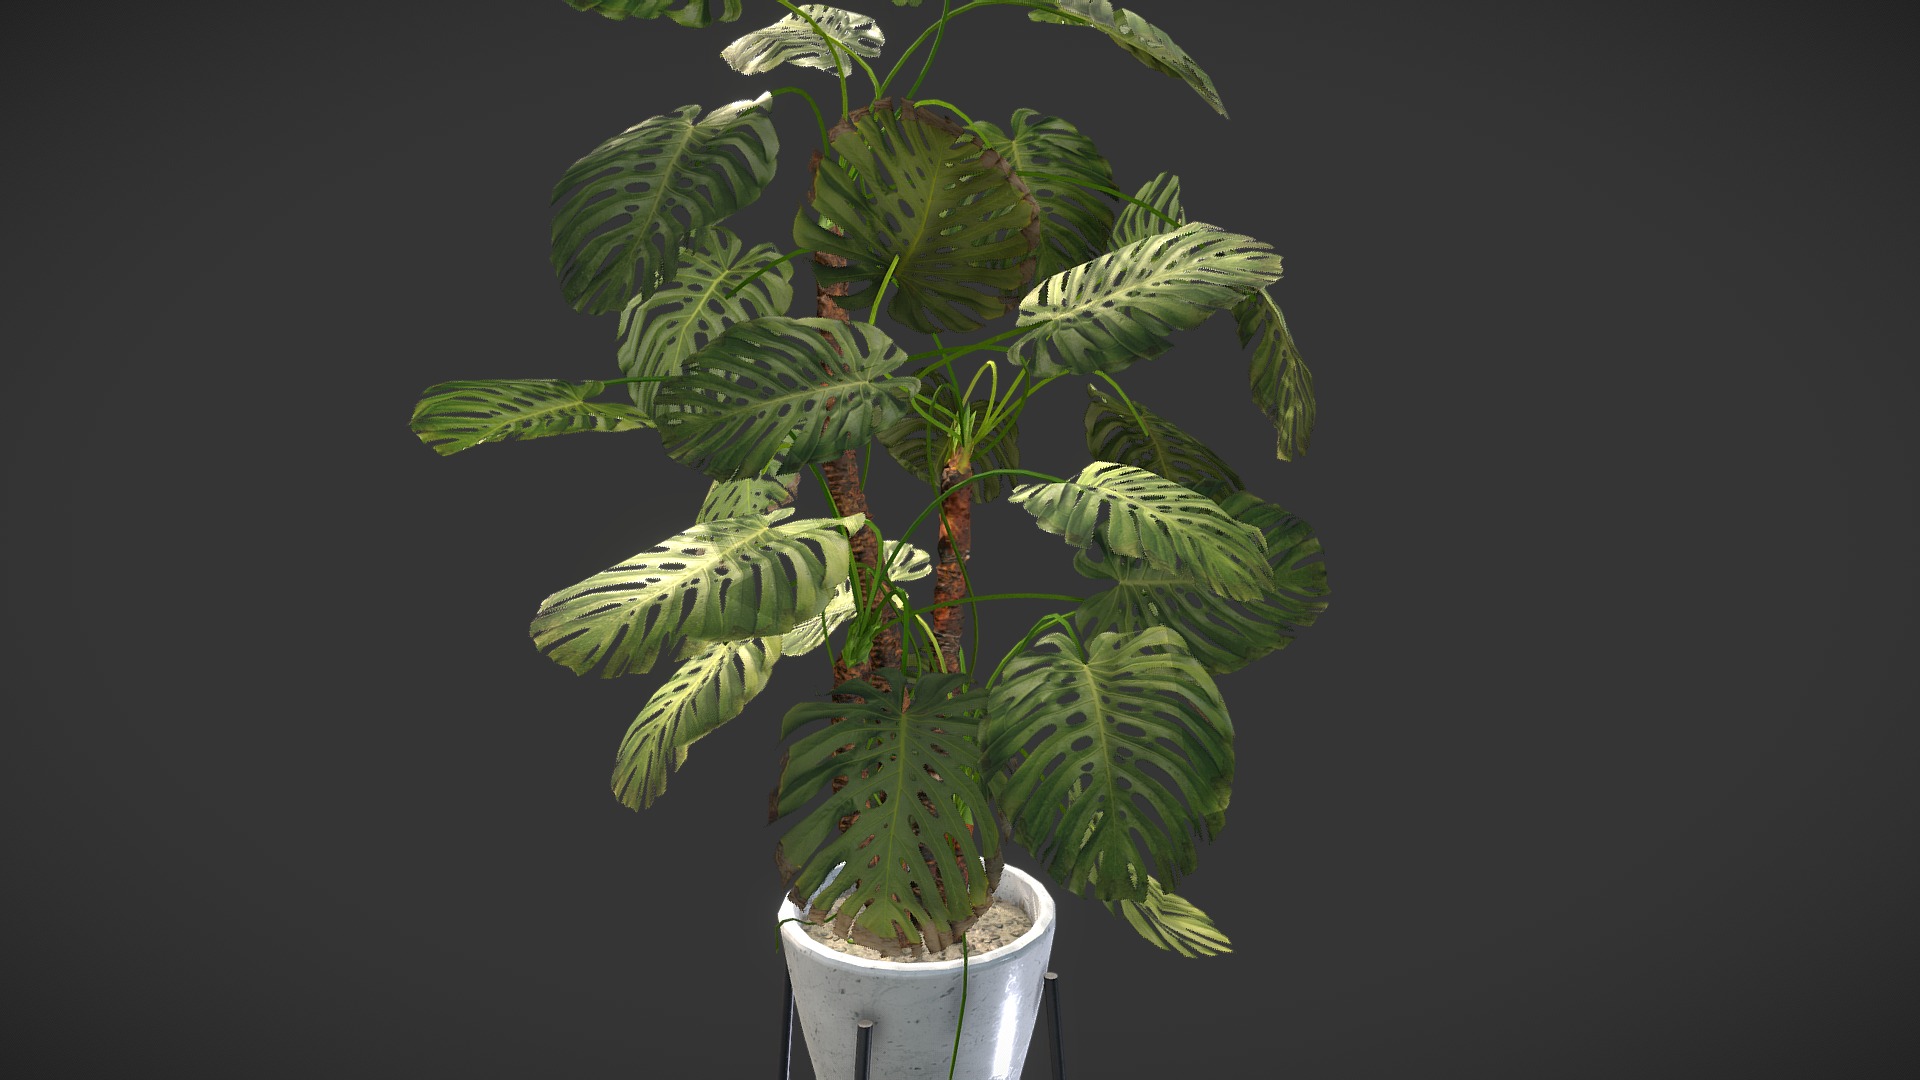 3D model Plant - This is a 3D model of the Plant. The 3D model is about a potted plant with green leaves.